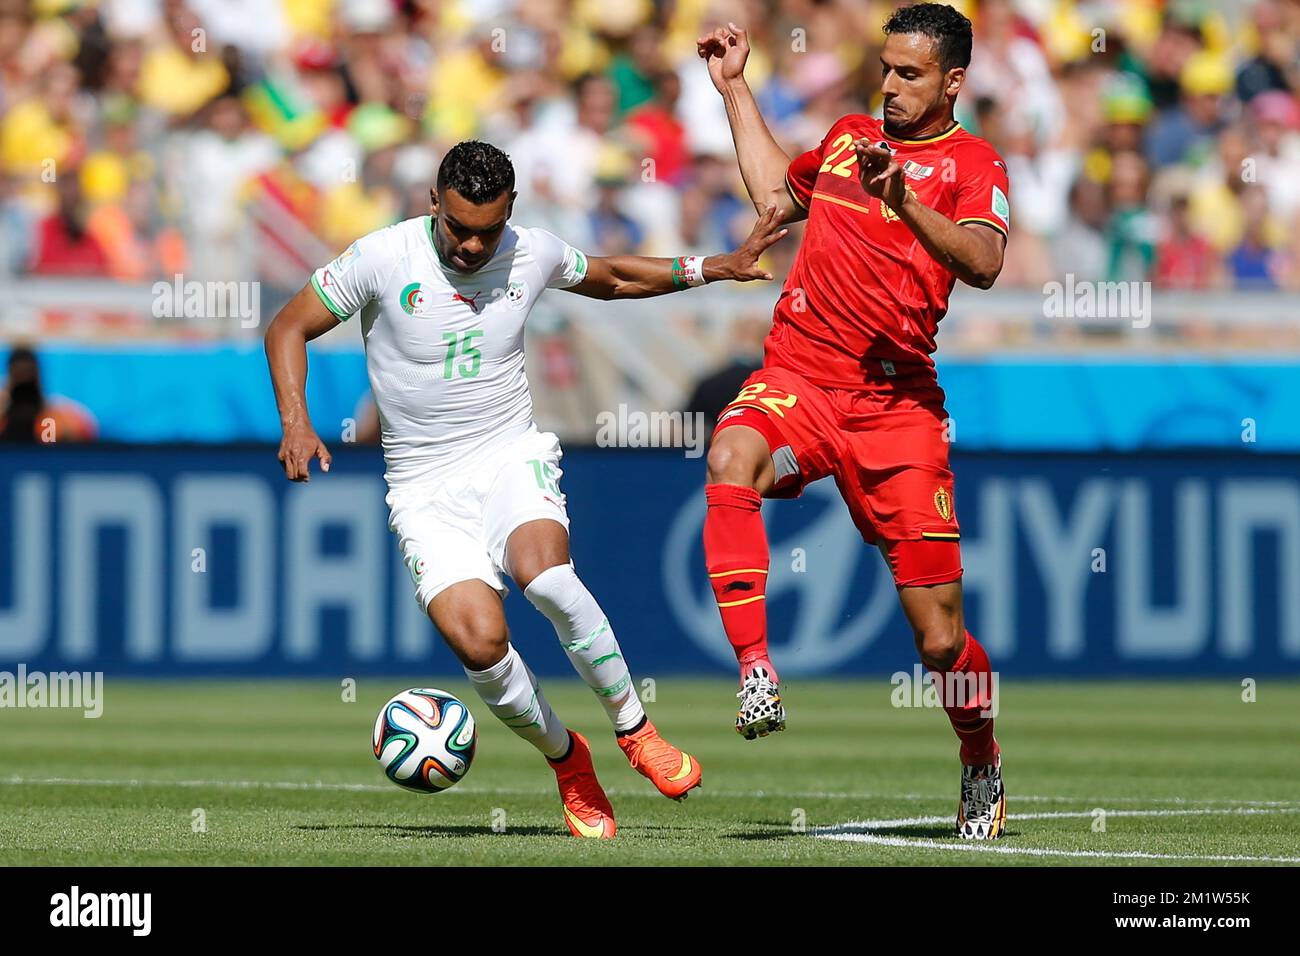 Algeria's El Arbi Hillel Soudani and Belgium's Nacer Chadli fight for the ball during a soccer game between Belgian national team The Red Devils and Algeria in Belo Horizonte, Brazil, the first game in Group H of the first round of the 2014 FIFA World Cup, Tuesday 17 June 2014. Stock Photo